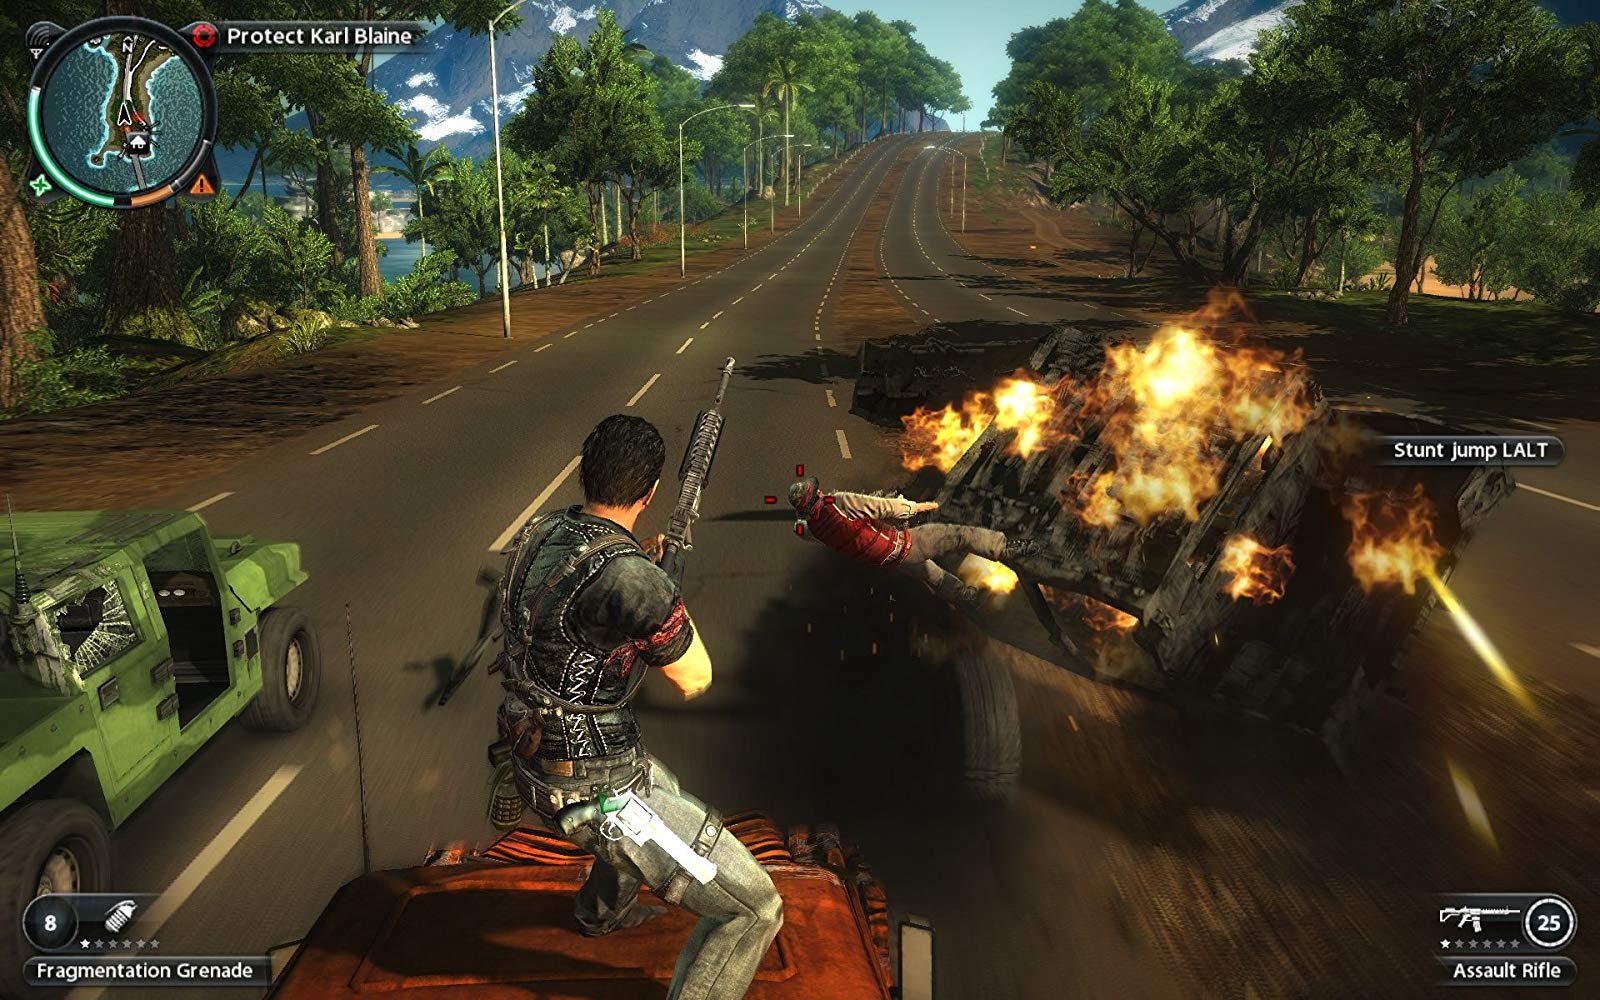 Just Cause 2 Overview